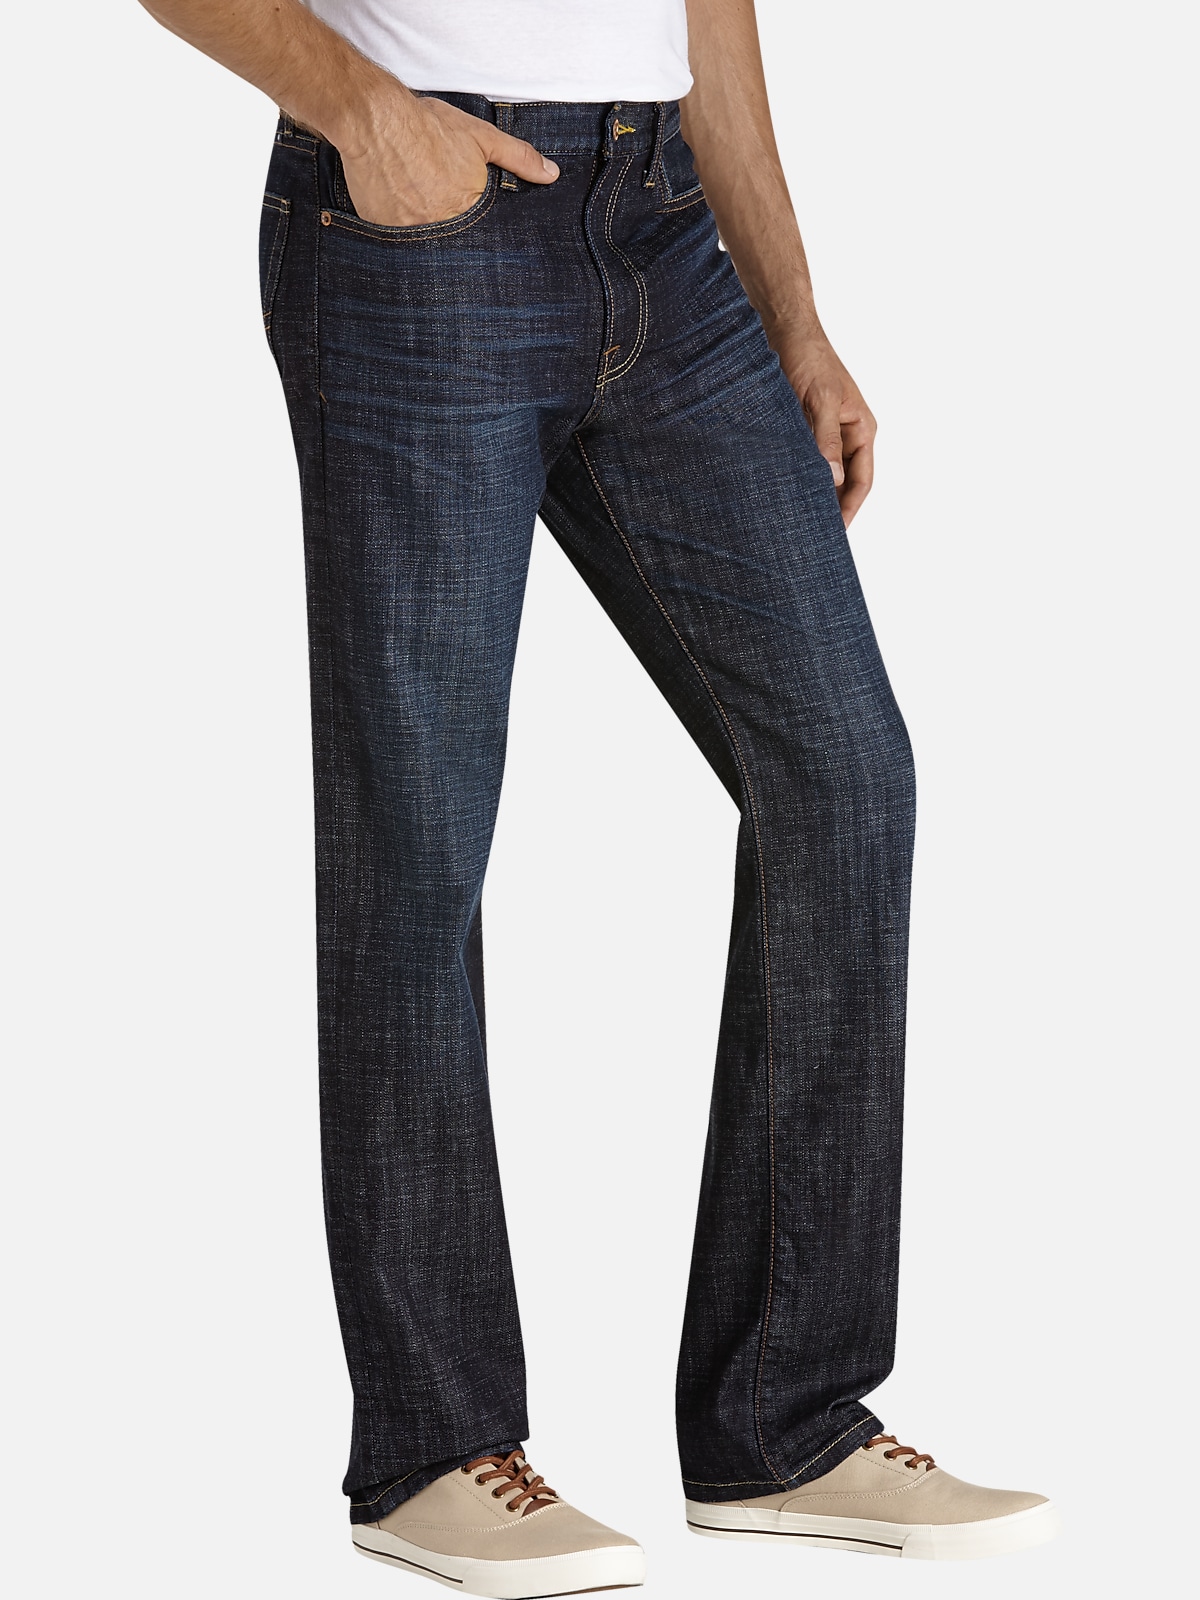 https://image.menswearhouse.com/is/image/TMW/TMW_224X_53_LUCKY_BRAND_JEANS_DARK_WASH_MAIN?imPolicy=pdp-zoom-mob